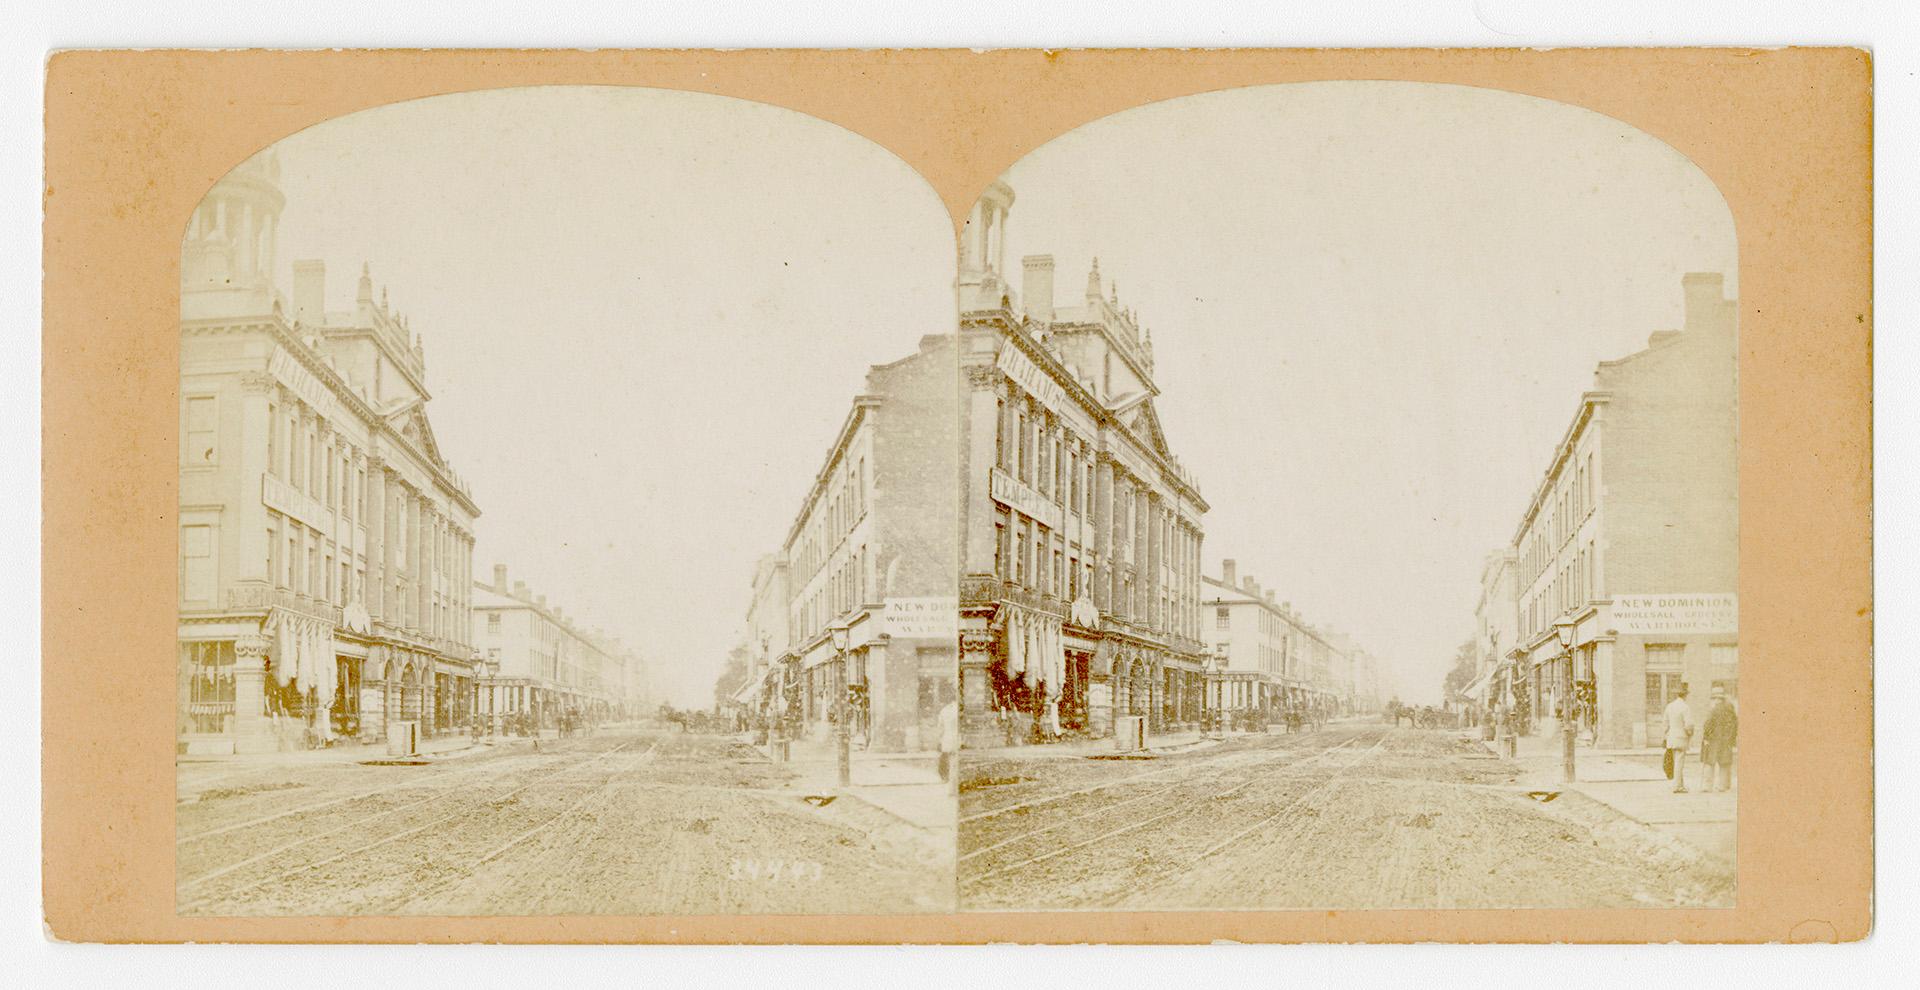 Pictures show a city street with large buildings on each side.